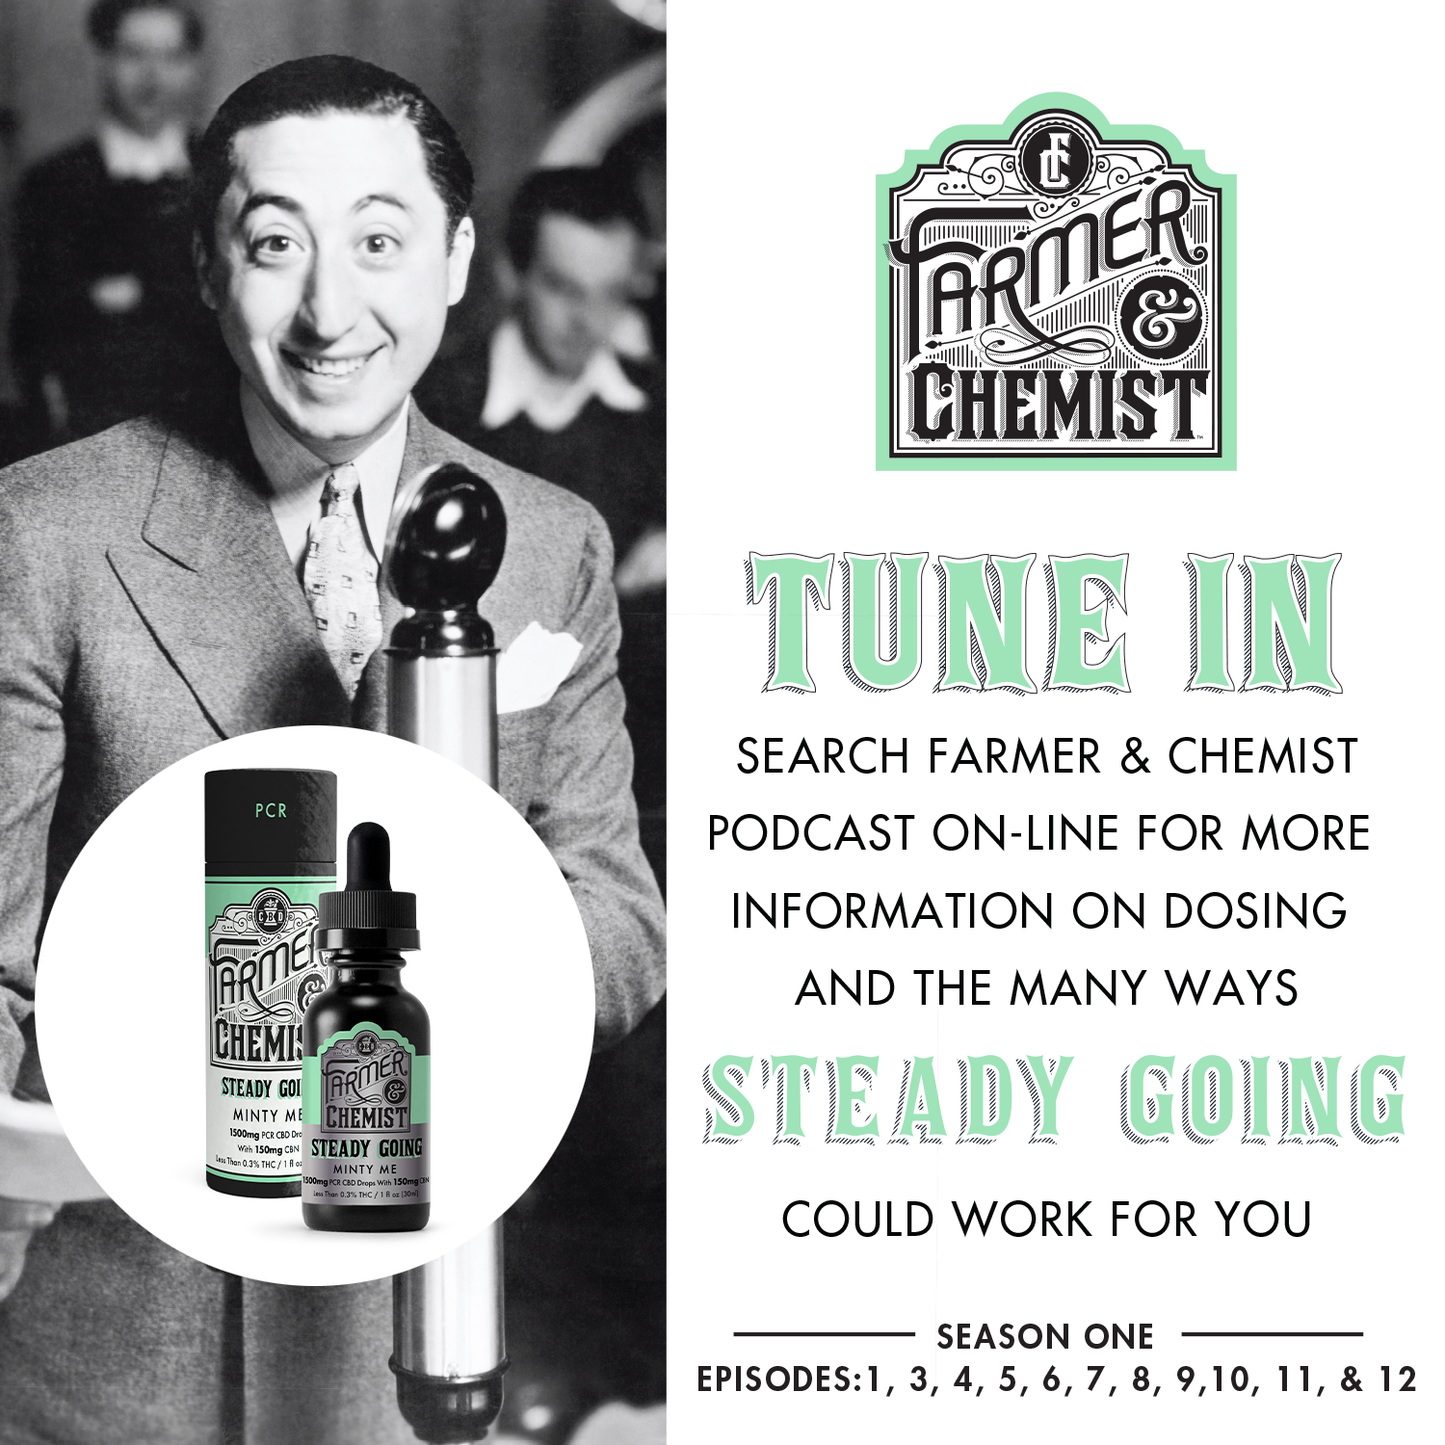 STEADY GOING - Minty Me 1500mg PCR Tincture (Case pack of 4)